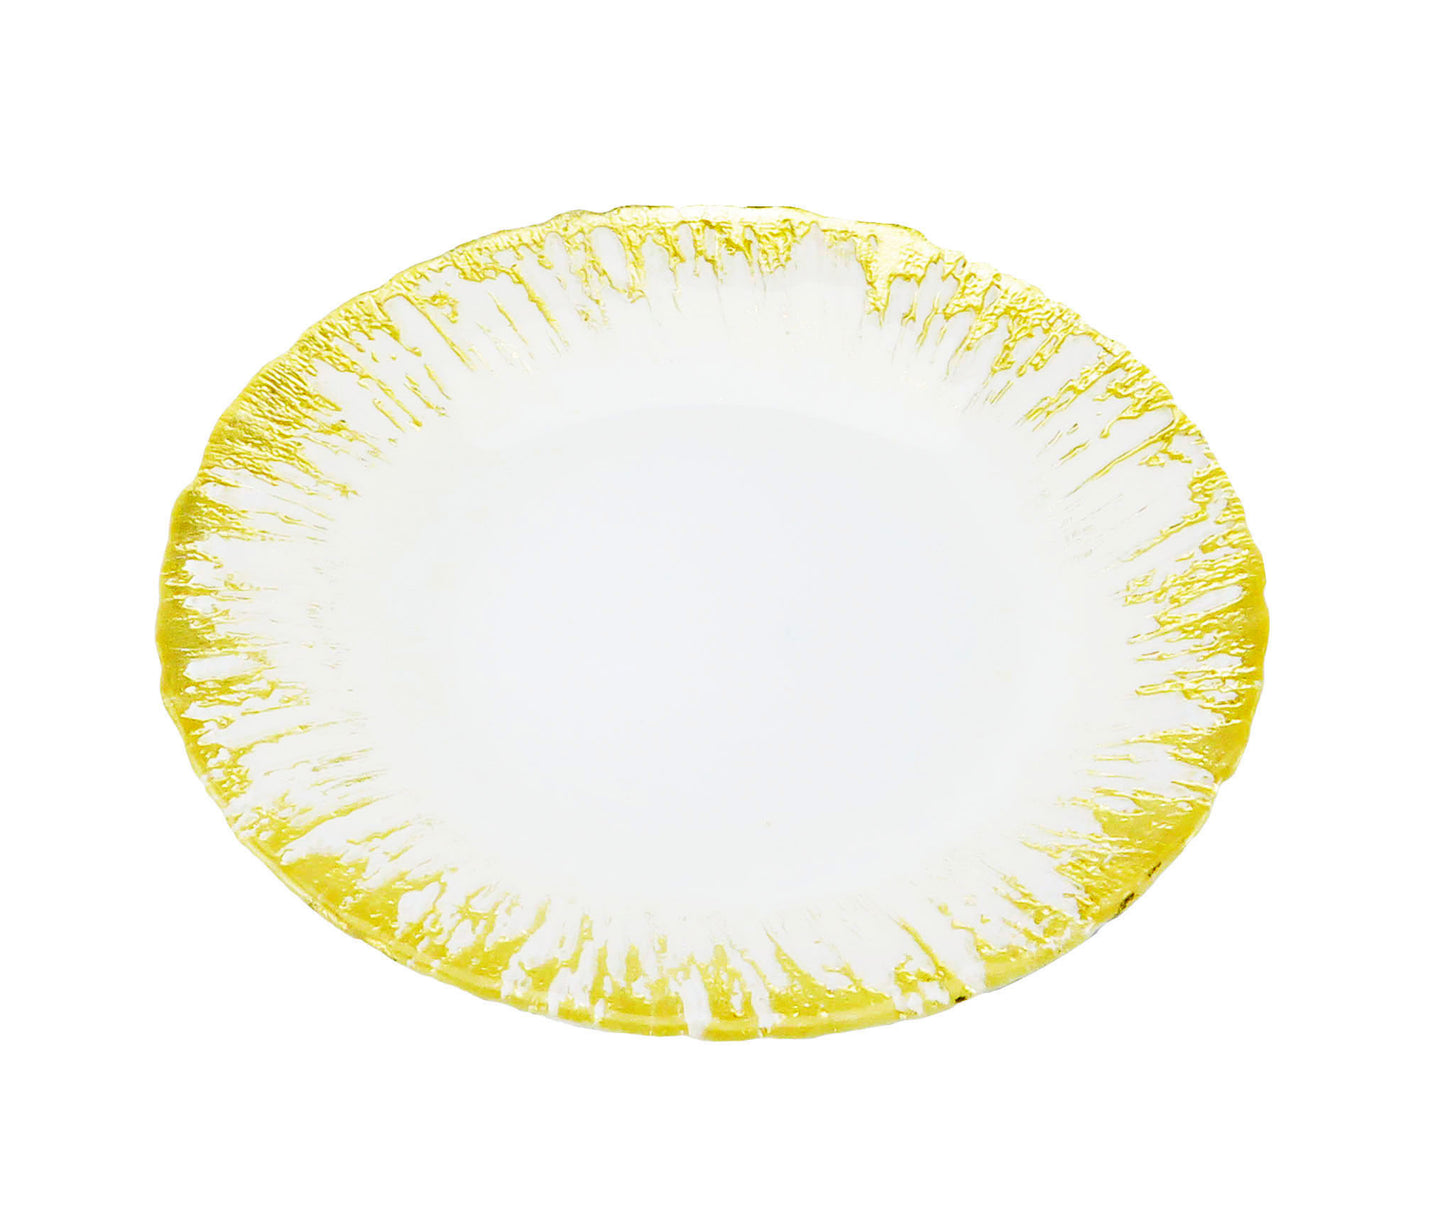 Set of 4 Milky Glass Dinner Plates with Flashy Gold Design